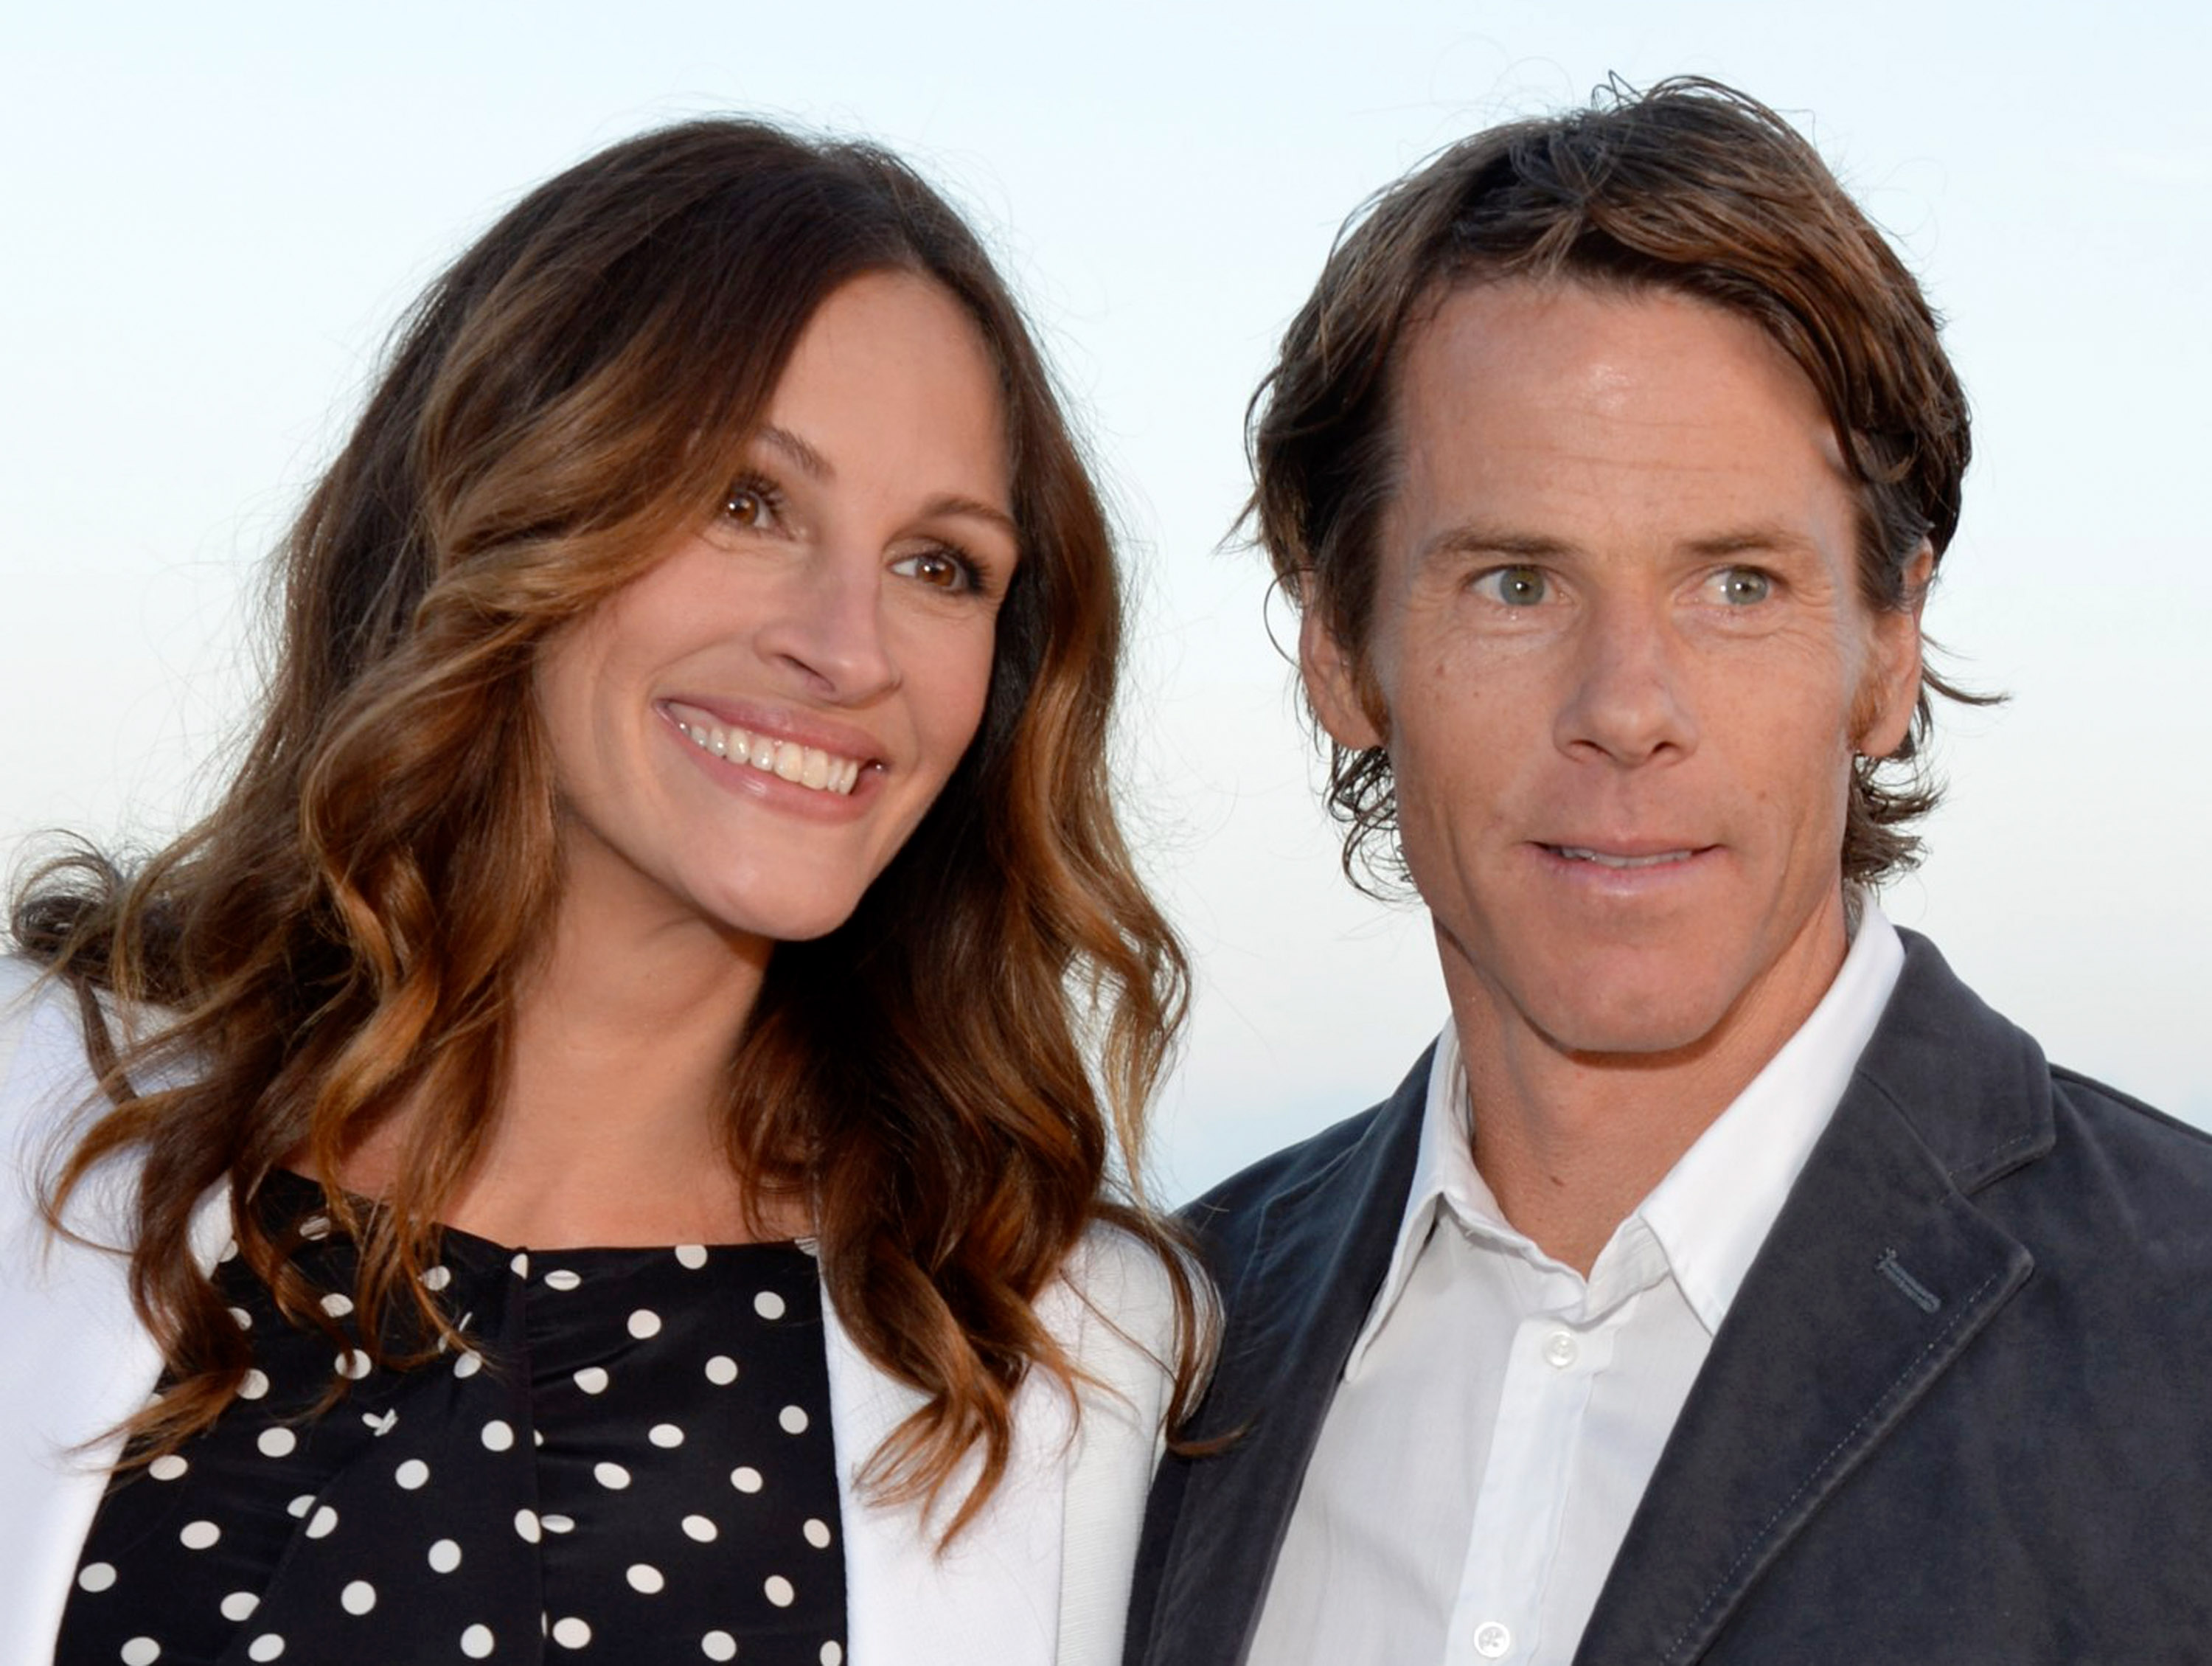 Julia Roberts and Danny Moder at the Heal The Bay's "Bring Back The Beach" Annual Awards Presentation & Dinner on May 17, 2012, in Santa Monica, California. | Source: Getty Images